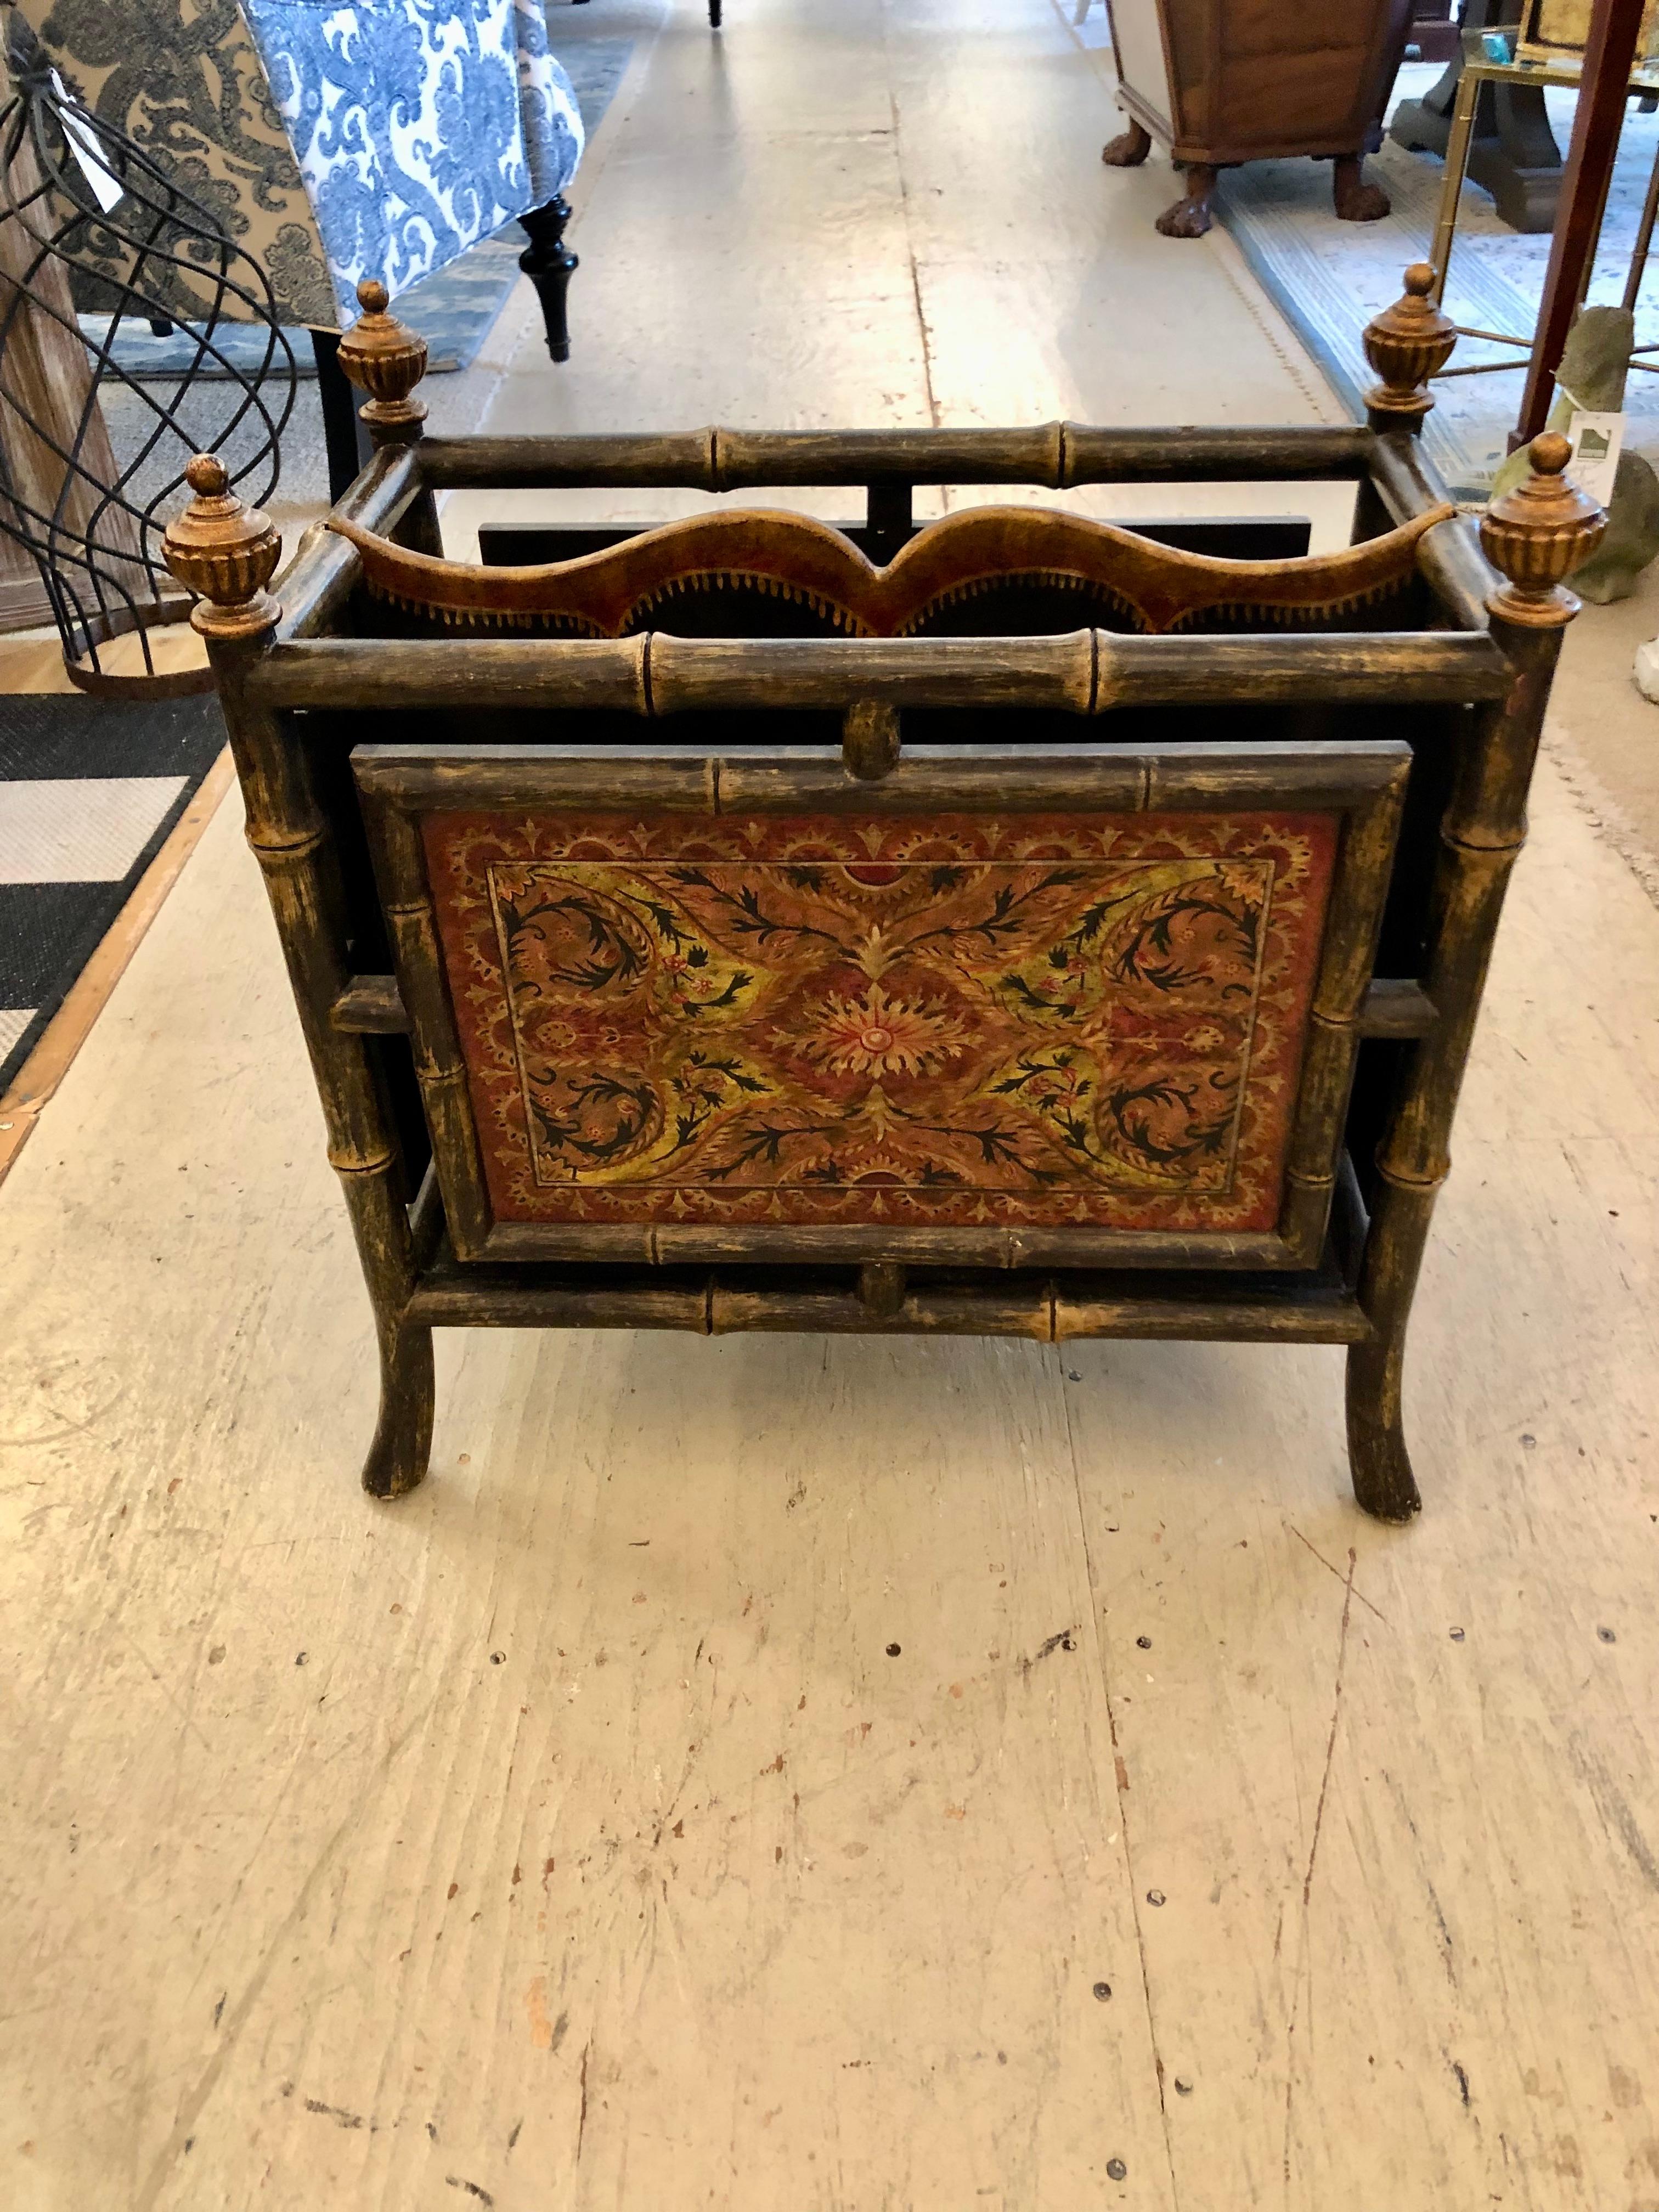 Impressive decorative designer magazine rack having antiqued faux bamboo structure and gorgeous intricately painted panels as well as carved gilded finials.
(Chris).